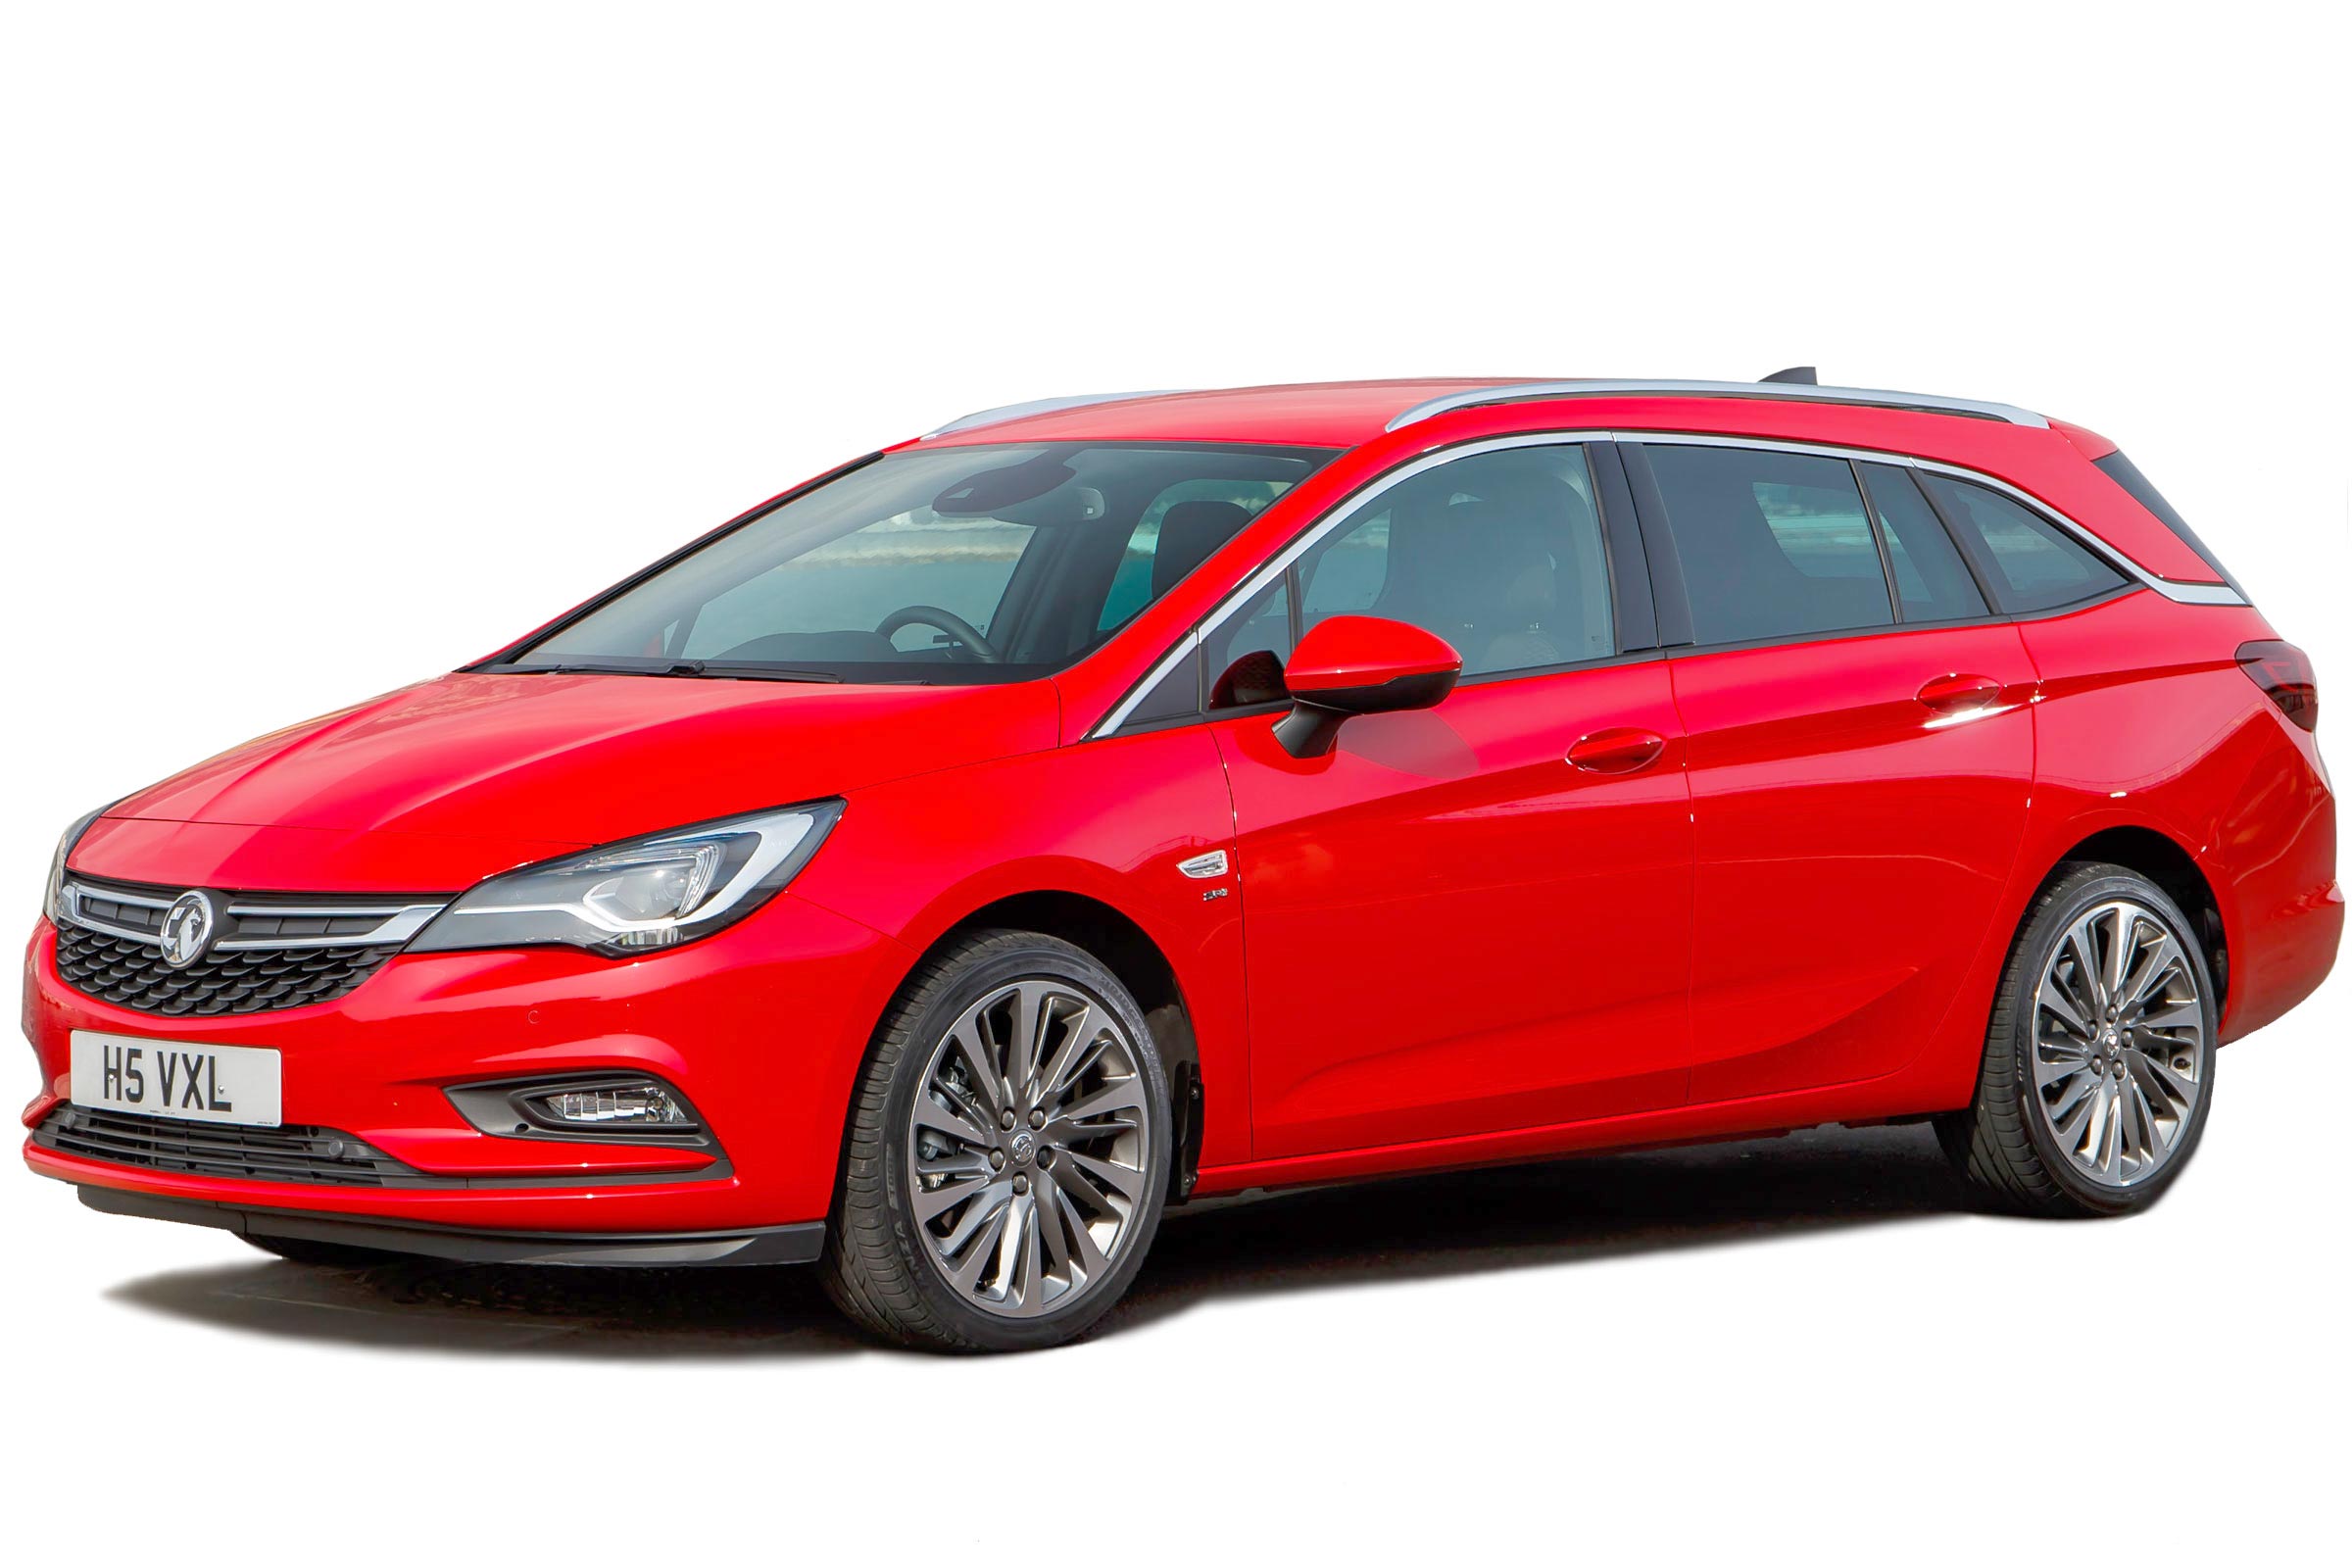 Vauxhall Astra Sports Tourer Estate Reliability Safety Review Carbuyer